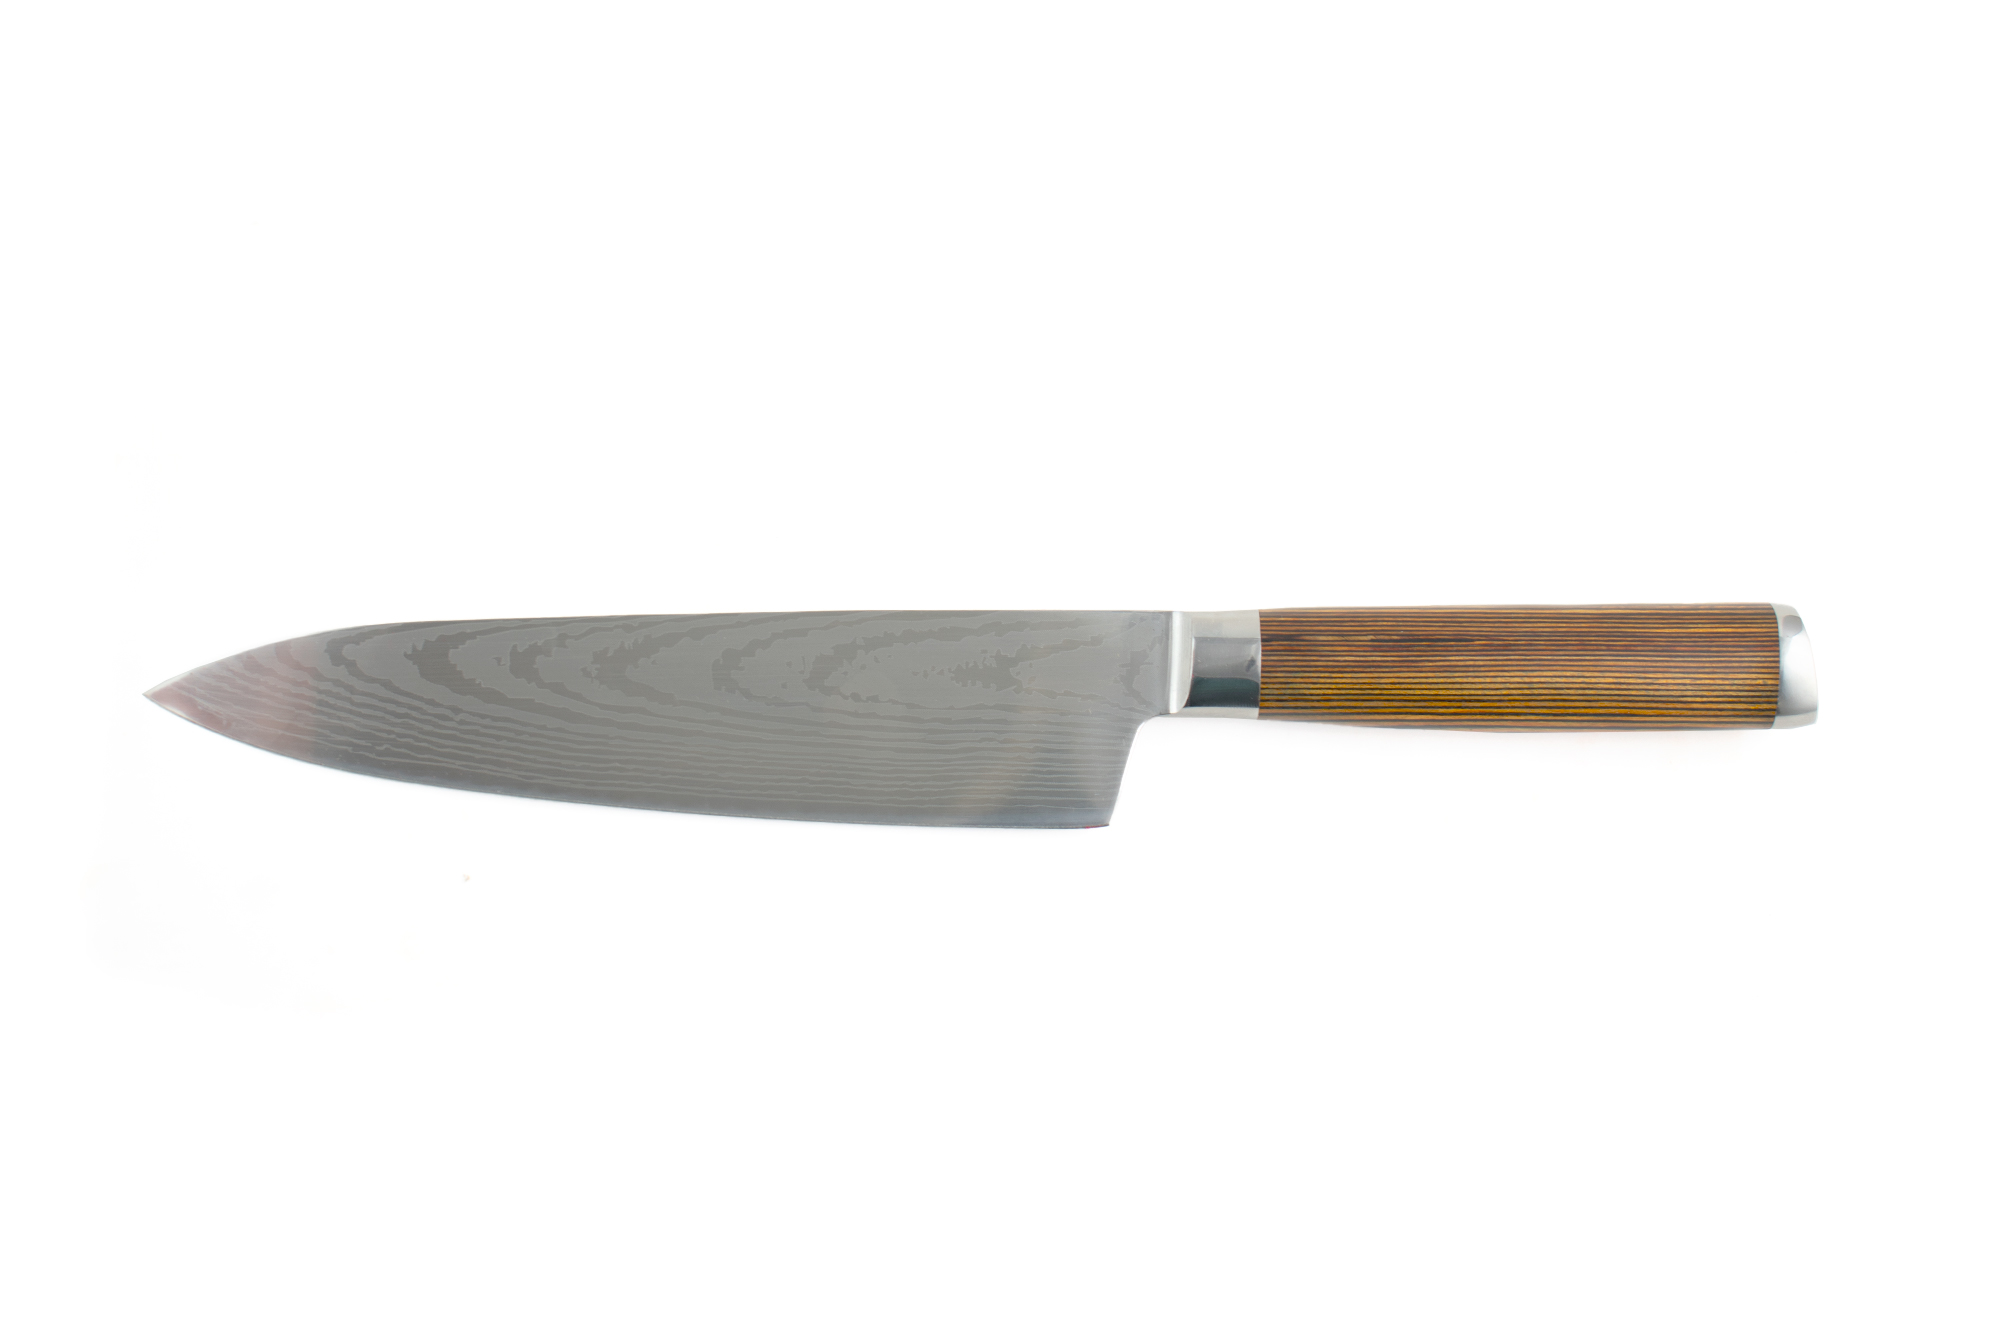 Professional stainless steel razor sharp chef knife 8-inch blade & wood handle